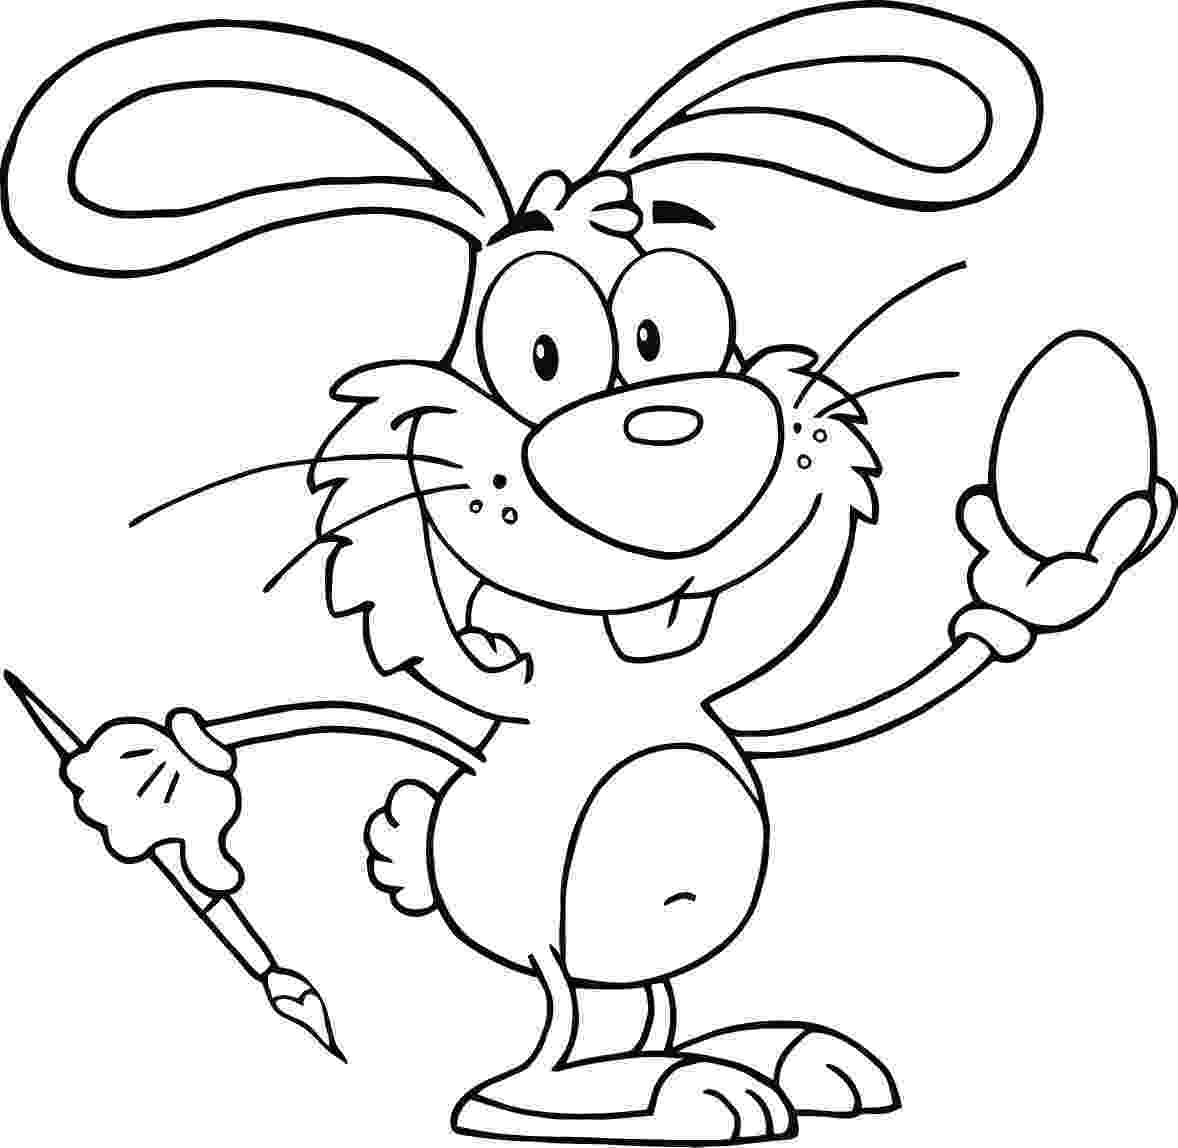 coloring pages bunnies printable transmissionpress bunny eating carrots coloring pages bunnies pages coloring printable 